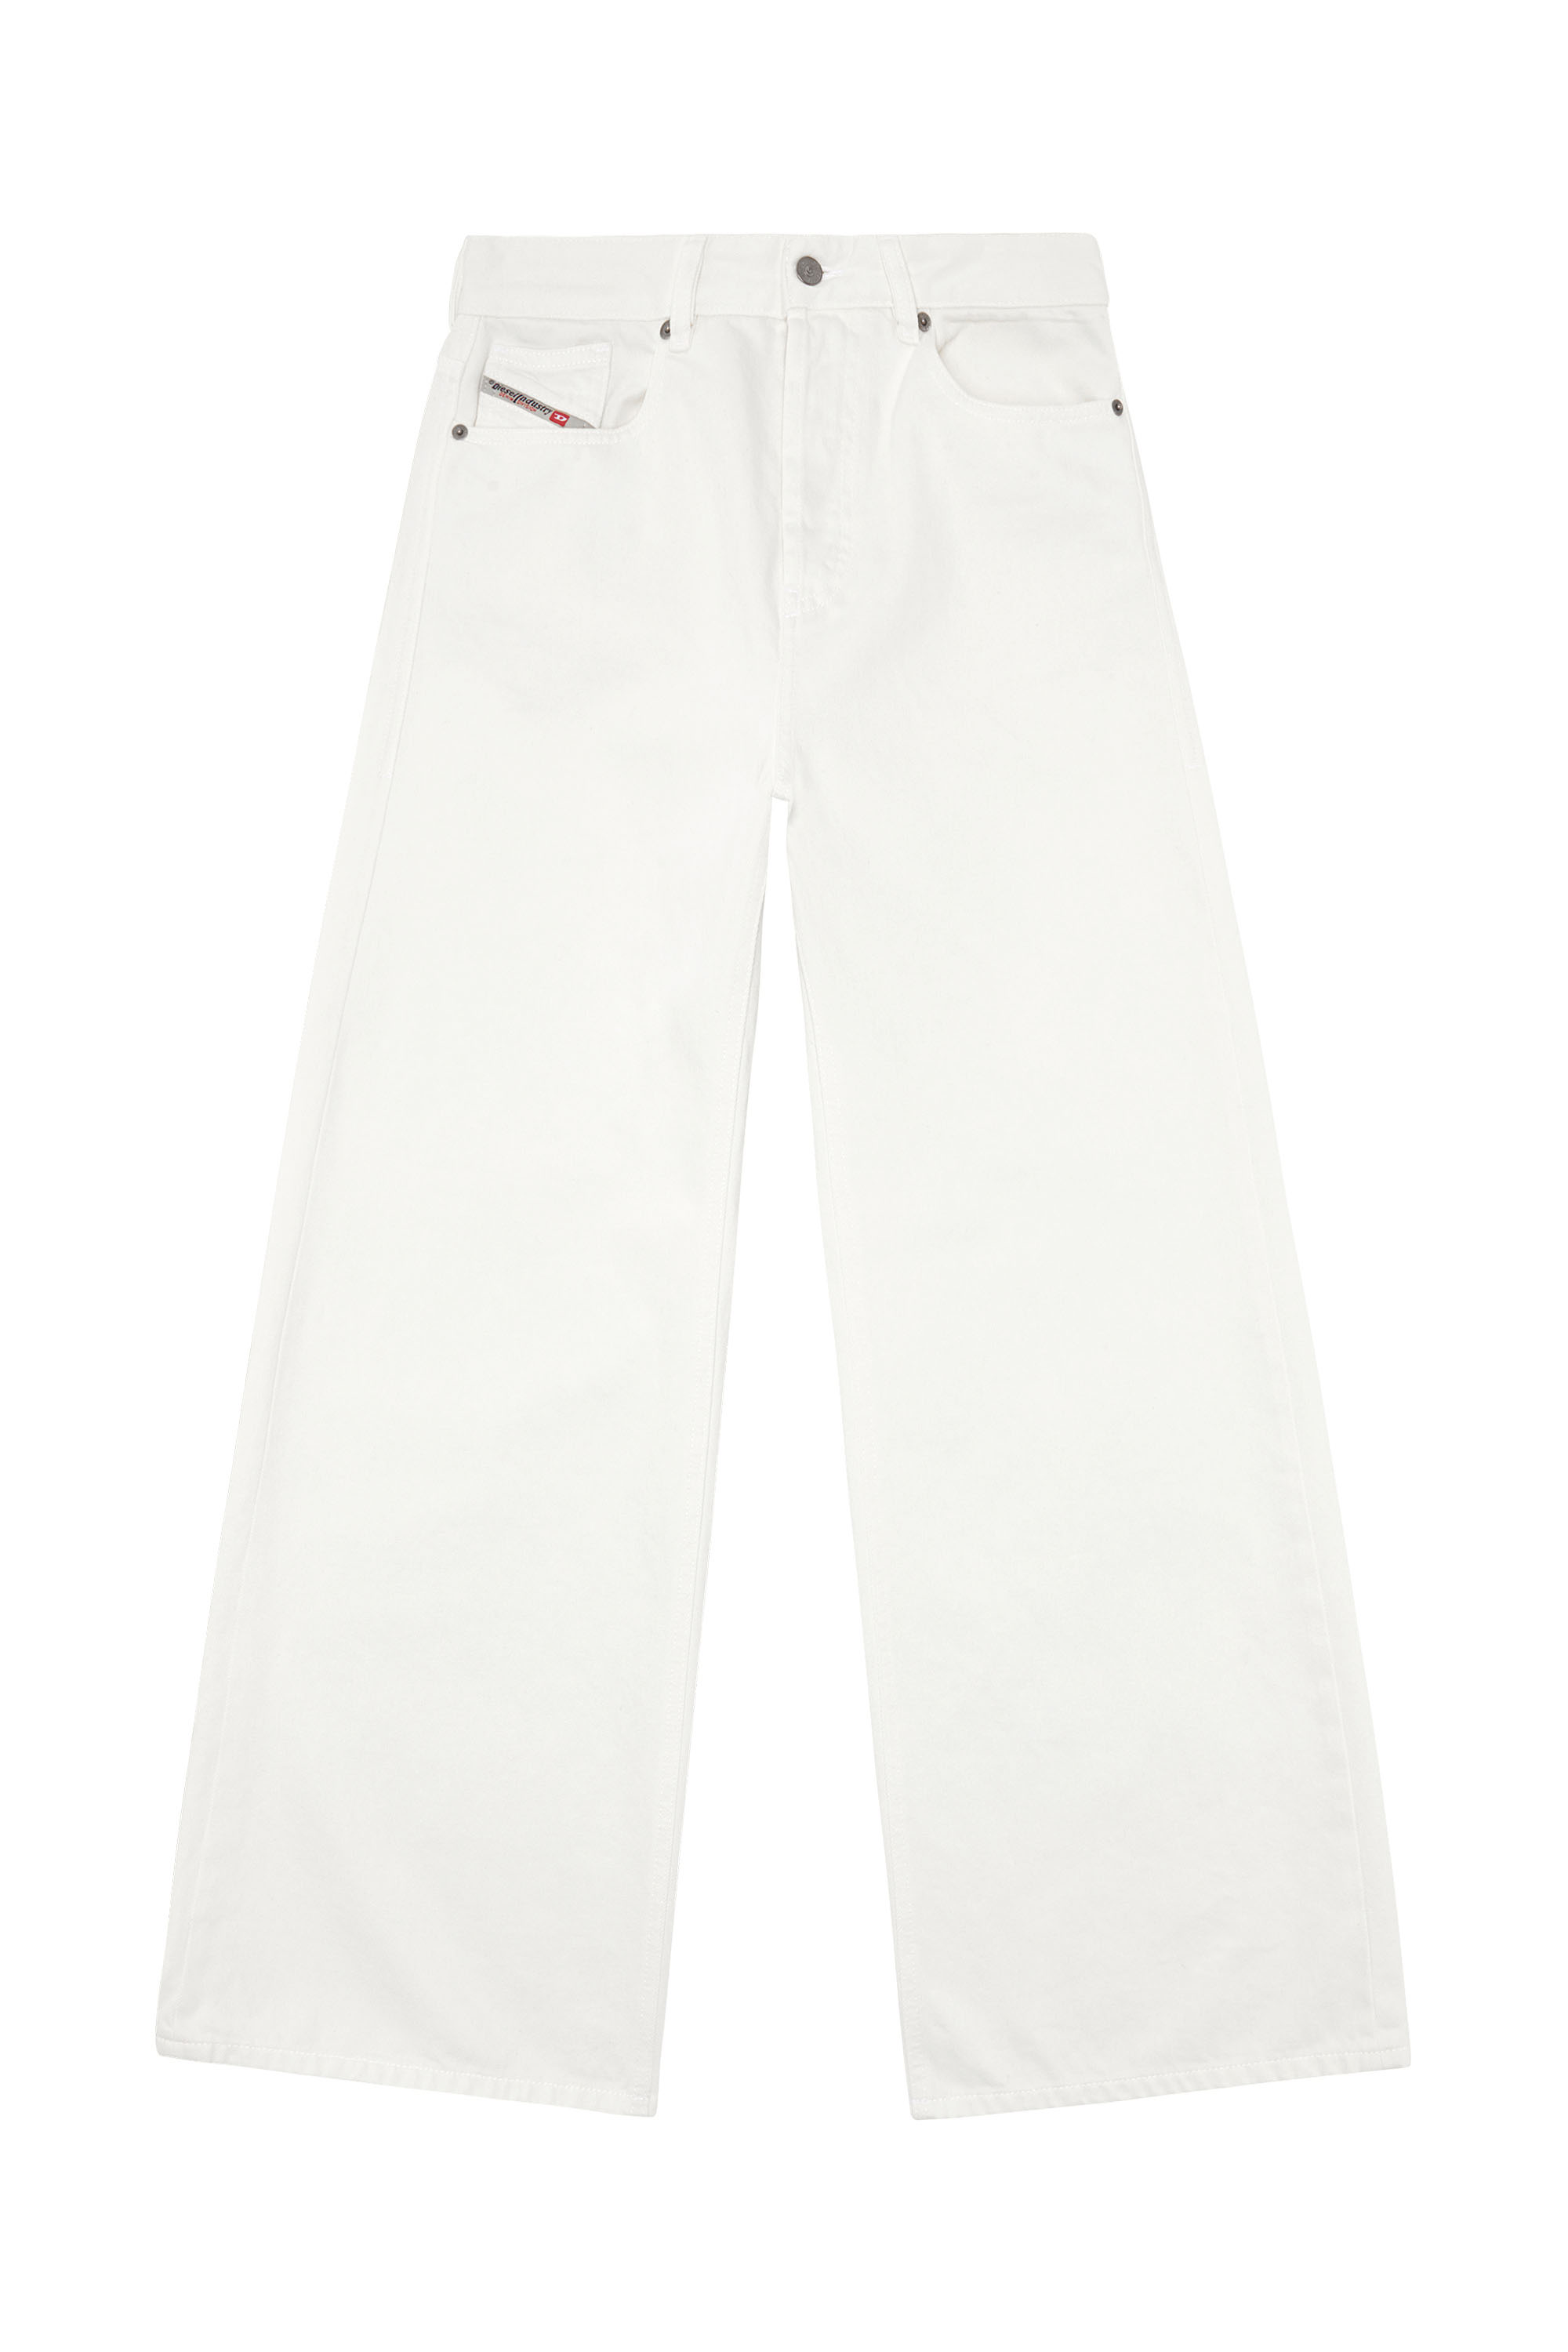 Diesel - Straight Jeans 1996 D-Sire 09I41, Mujer Straight Jeans - 1996 D-Sire in Blanco - Image 7